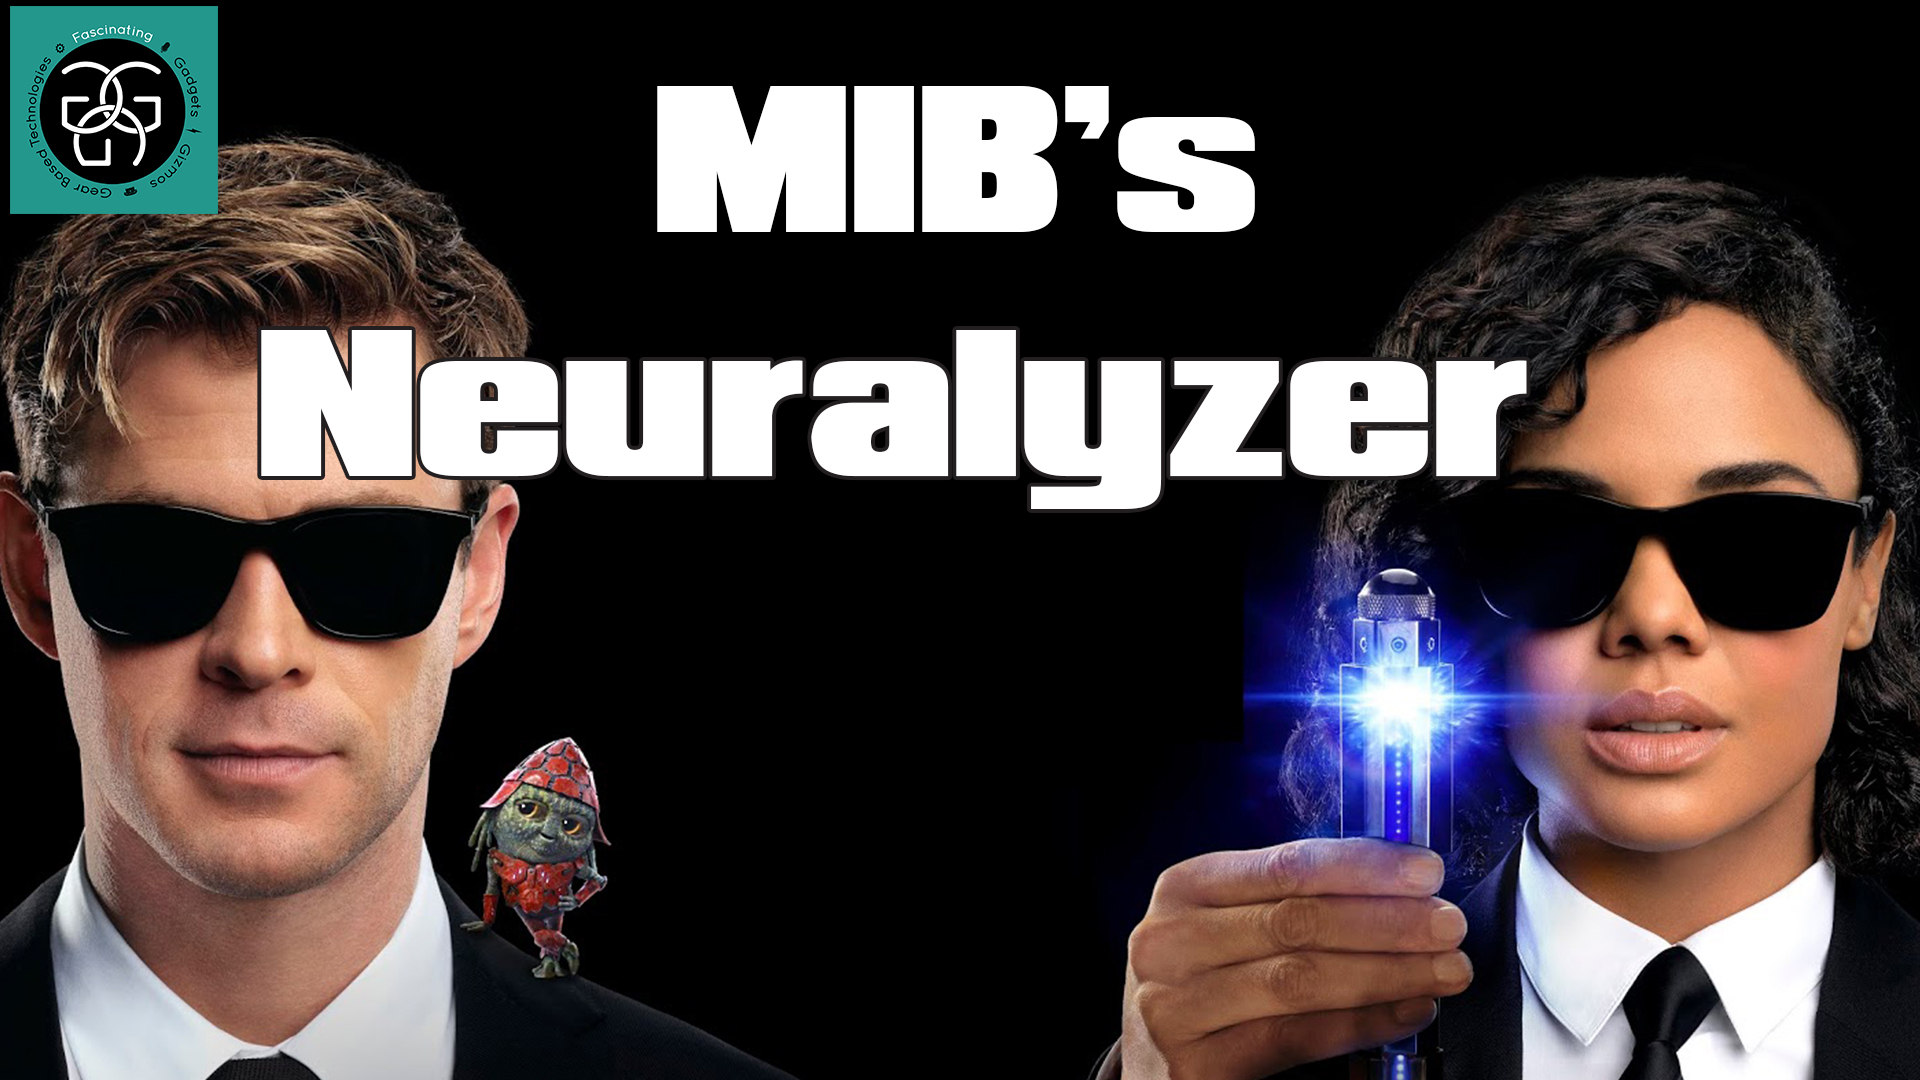 Read more about the article Ep. 22 MIB’s Neuralyzer